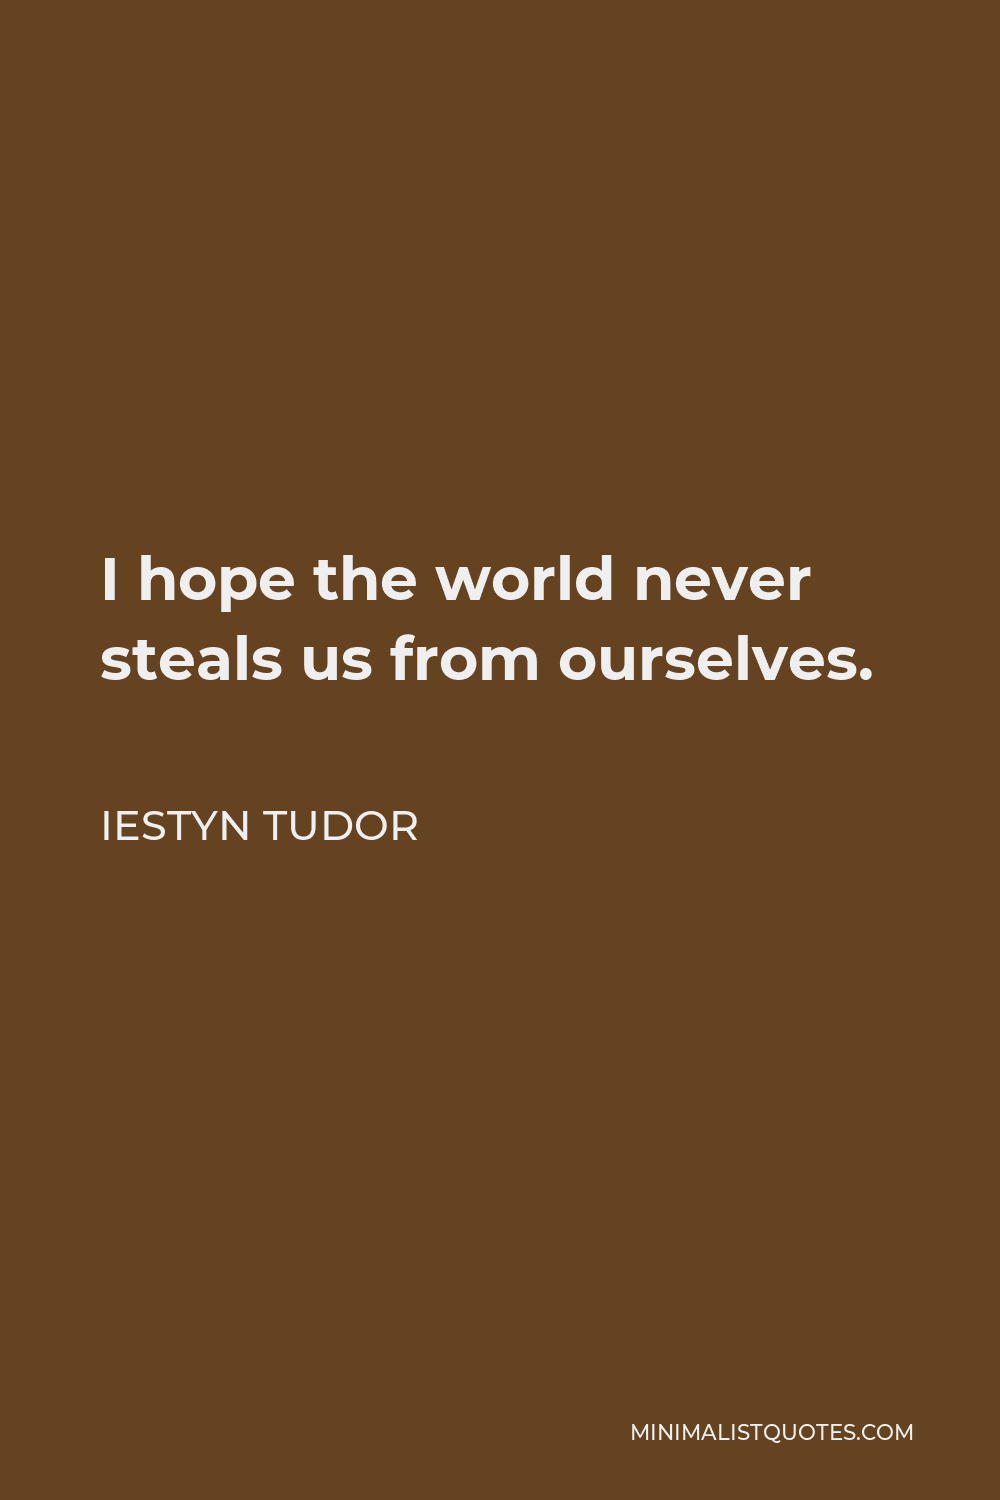 Iestyn Tudor Quote - I hope the world never steals us from ourselves.